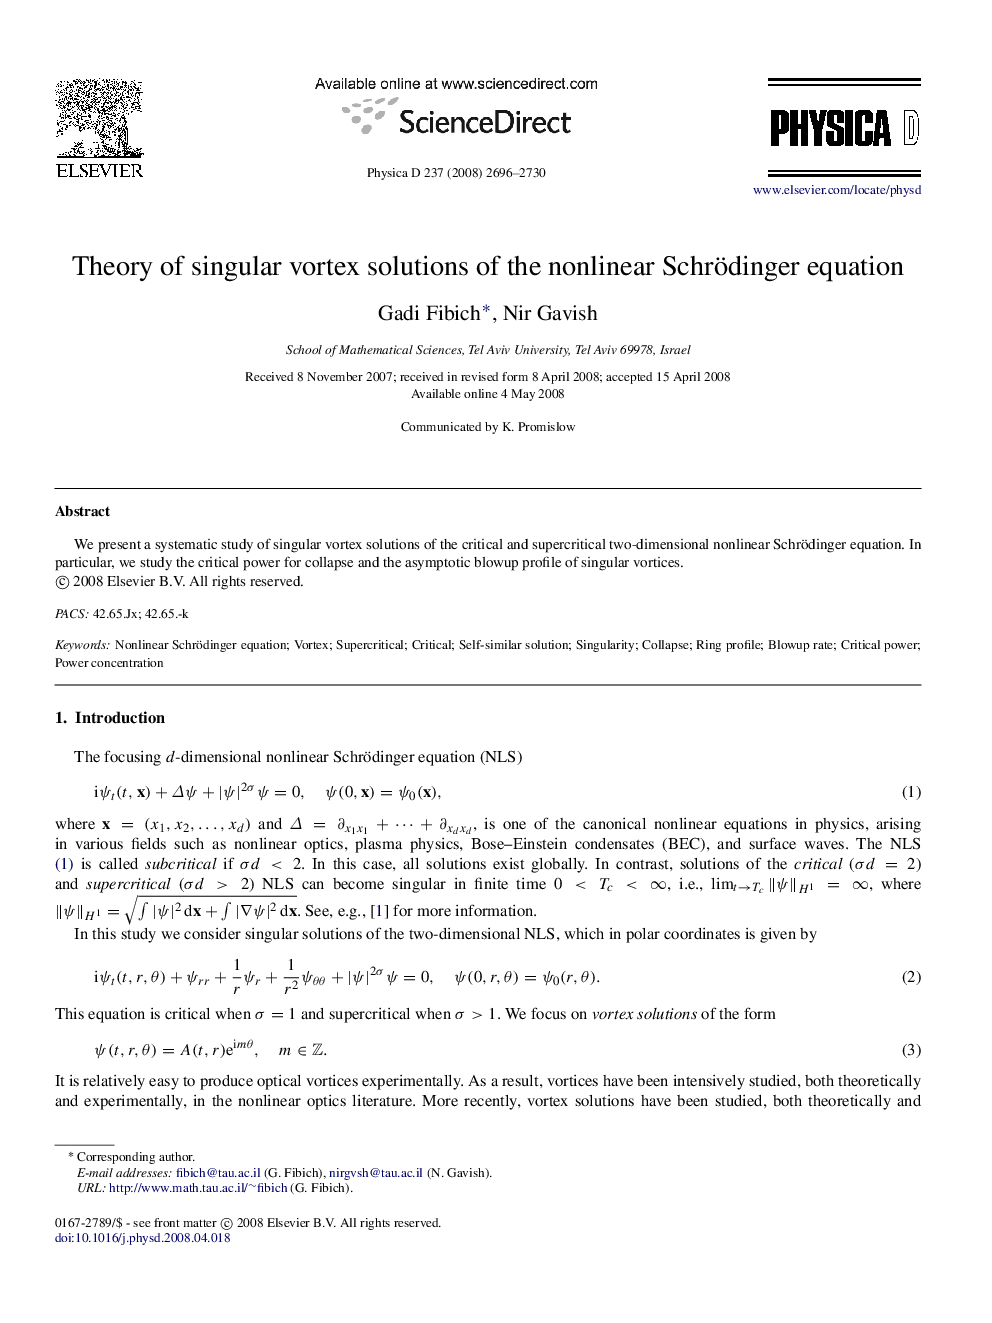 Theory of singular vortex solutions of the nonlinear Schrödinger equation